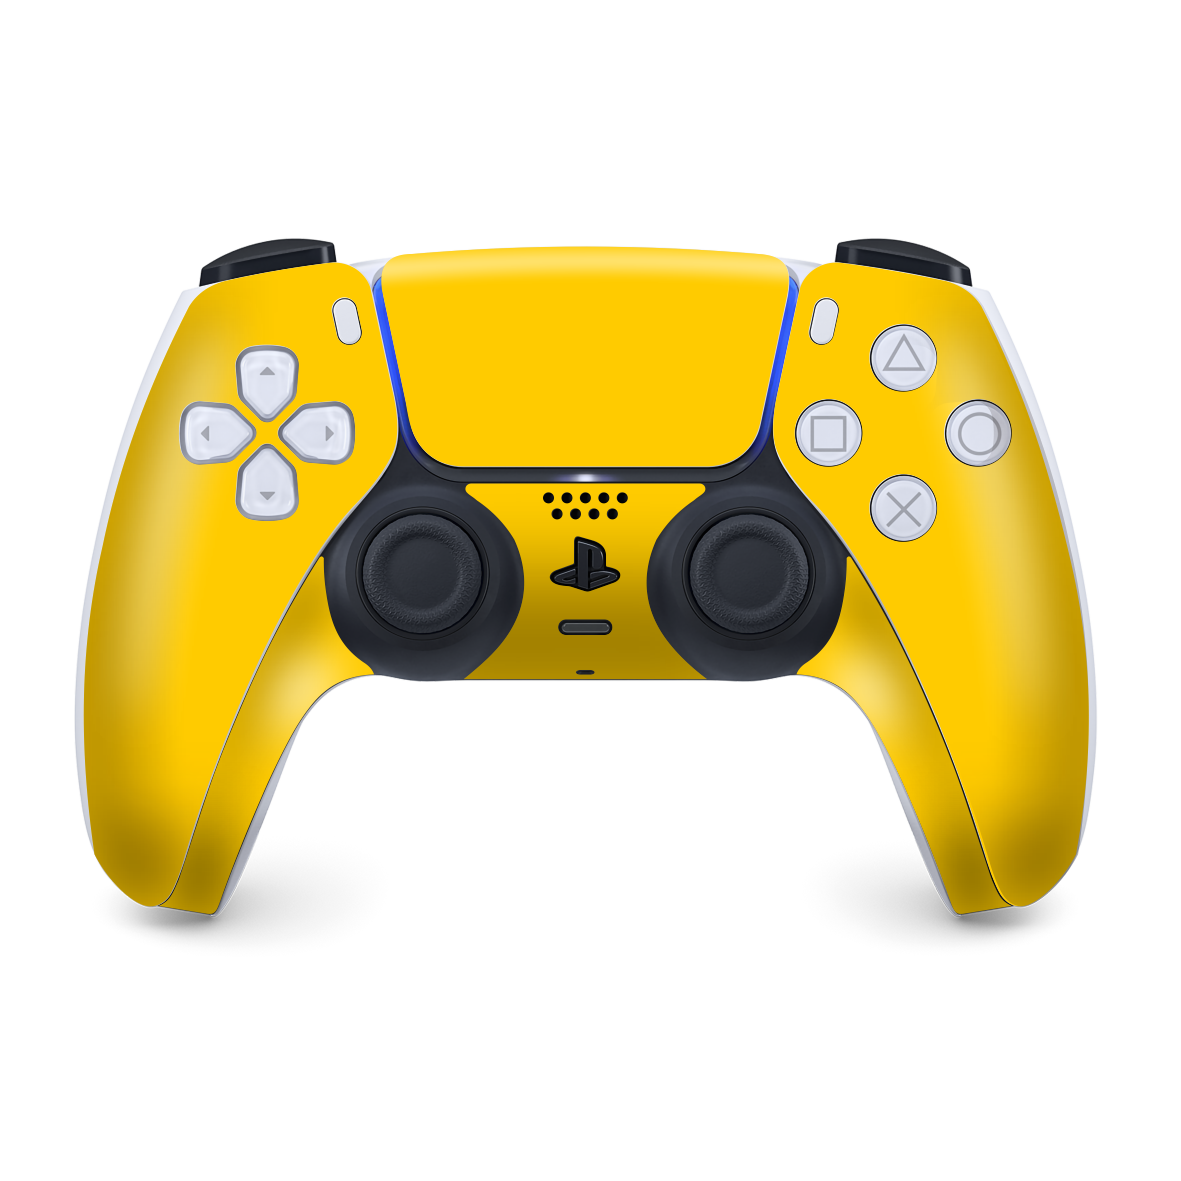 PS5 Playstation 5 DualSense Wireless Controller Skin - Gloss Glossy Golden Yellow Skin Wrap Decal Cover Protector by EasySkinz | EasySkinz.com